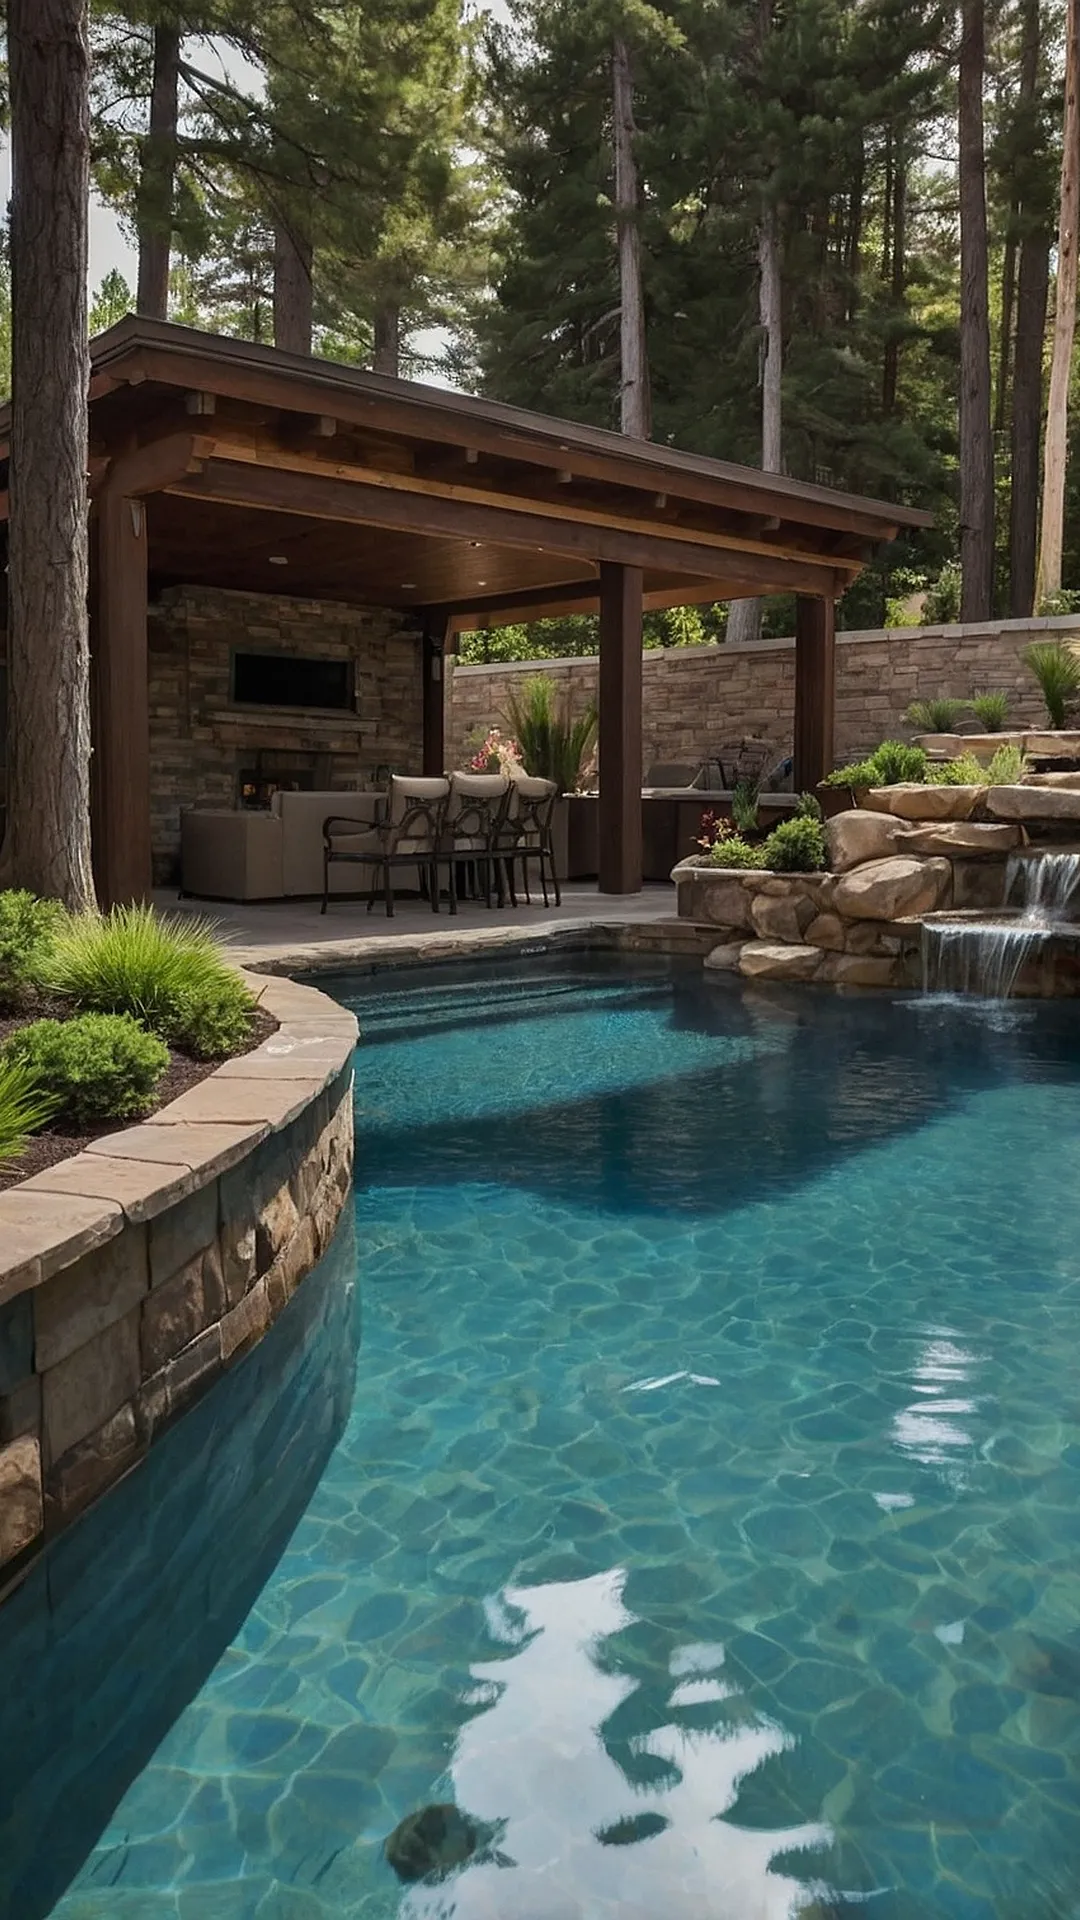 Bijou Poolscapes: Ideas for Small Inground Pools